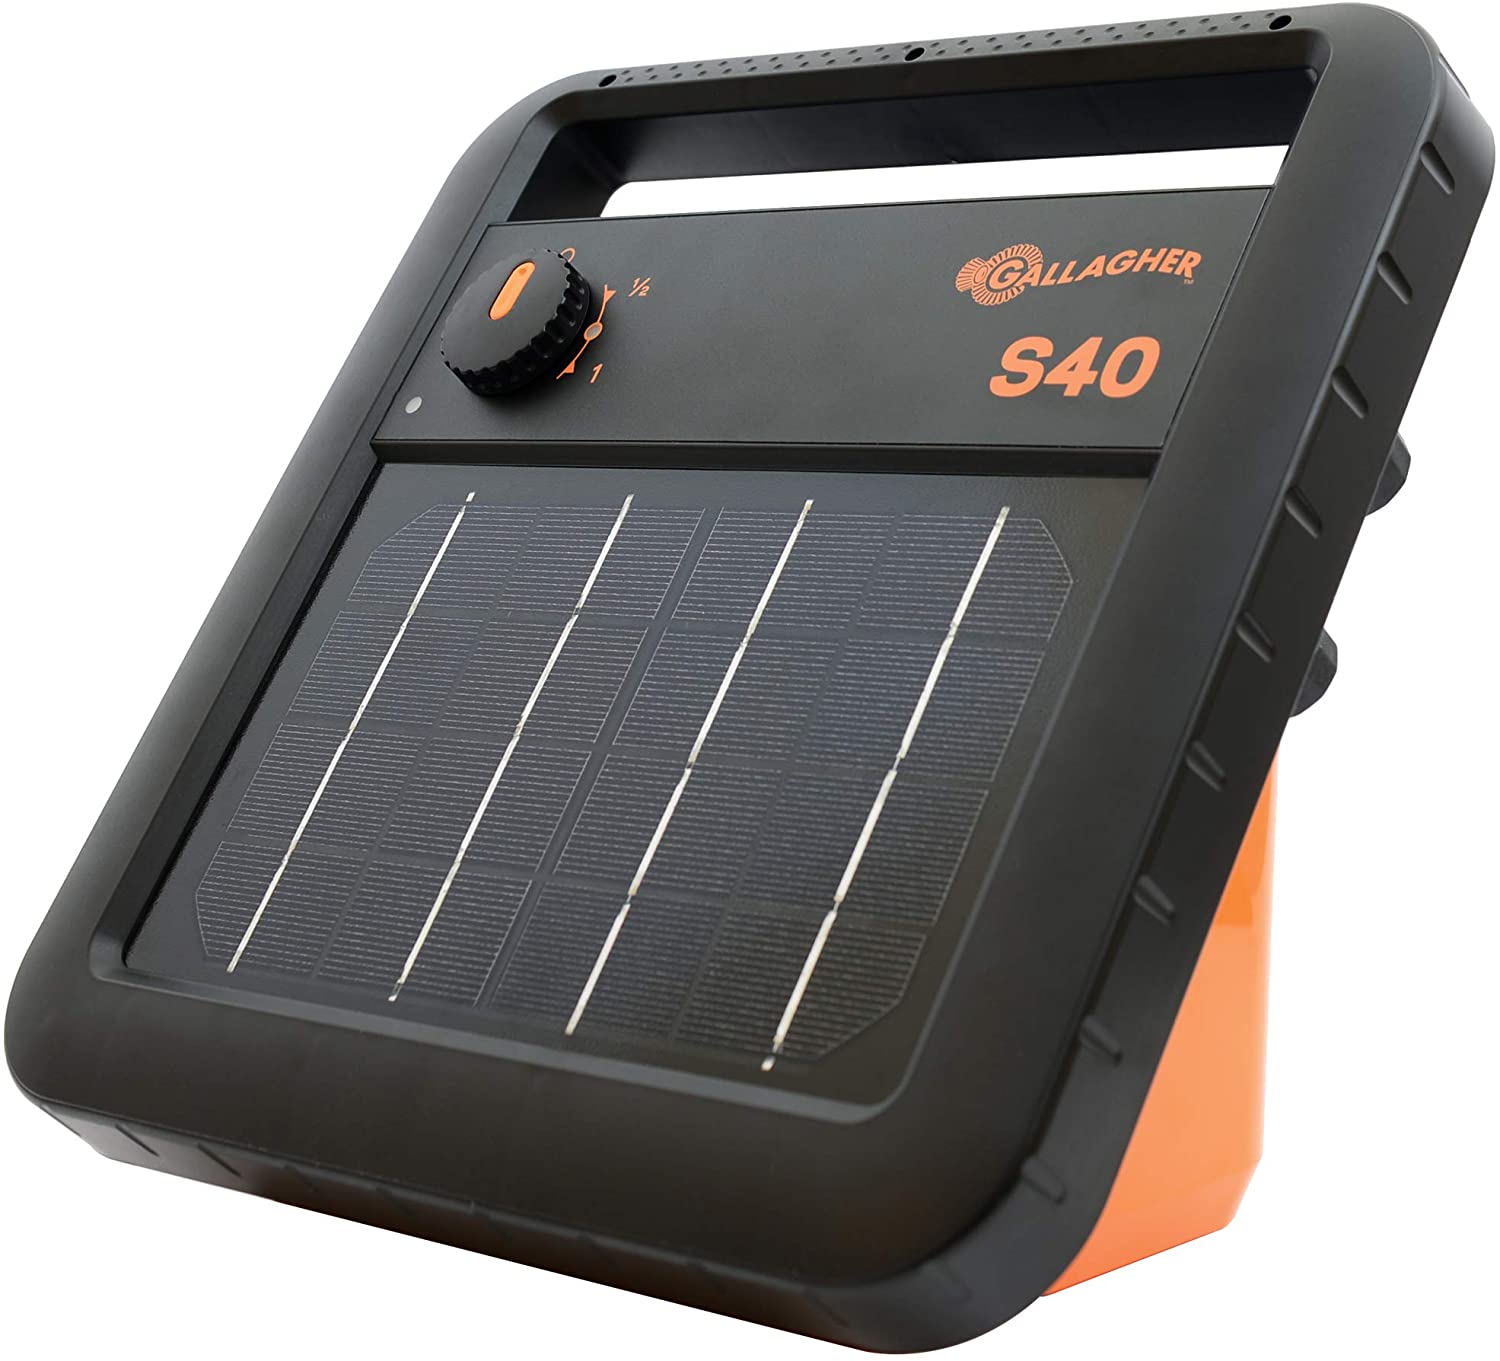 Gallagher S40 Solar Electric Fence Charger